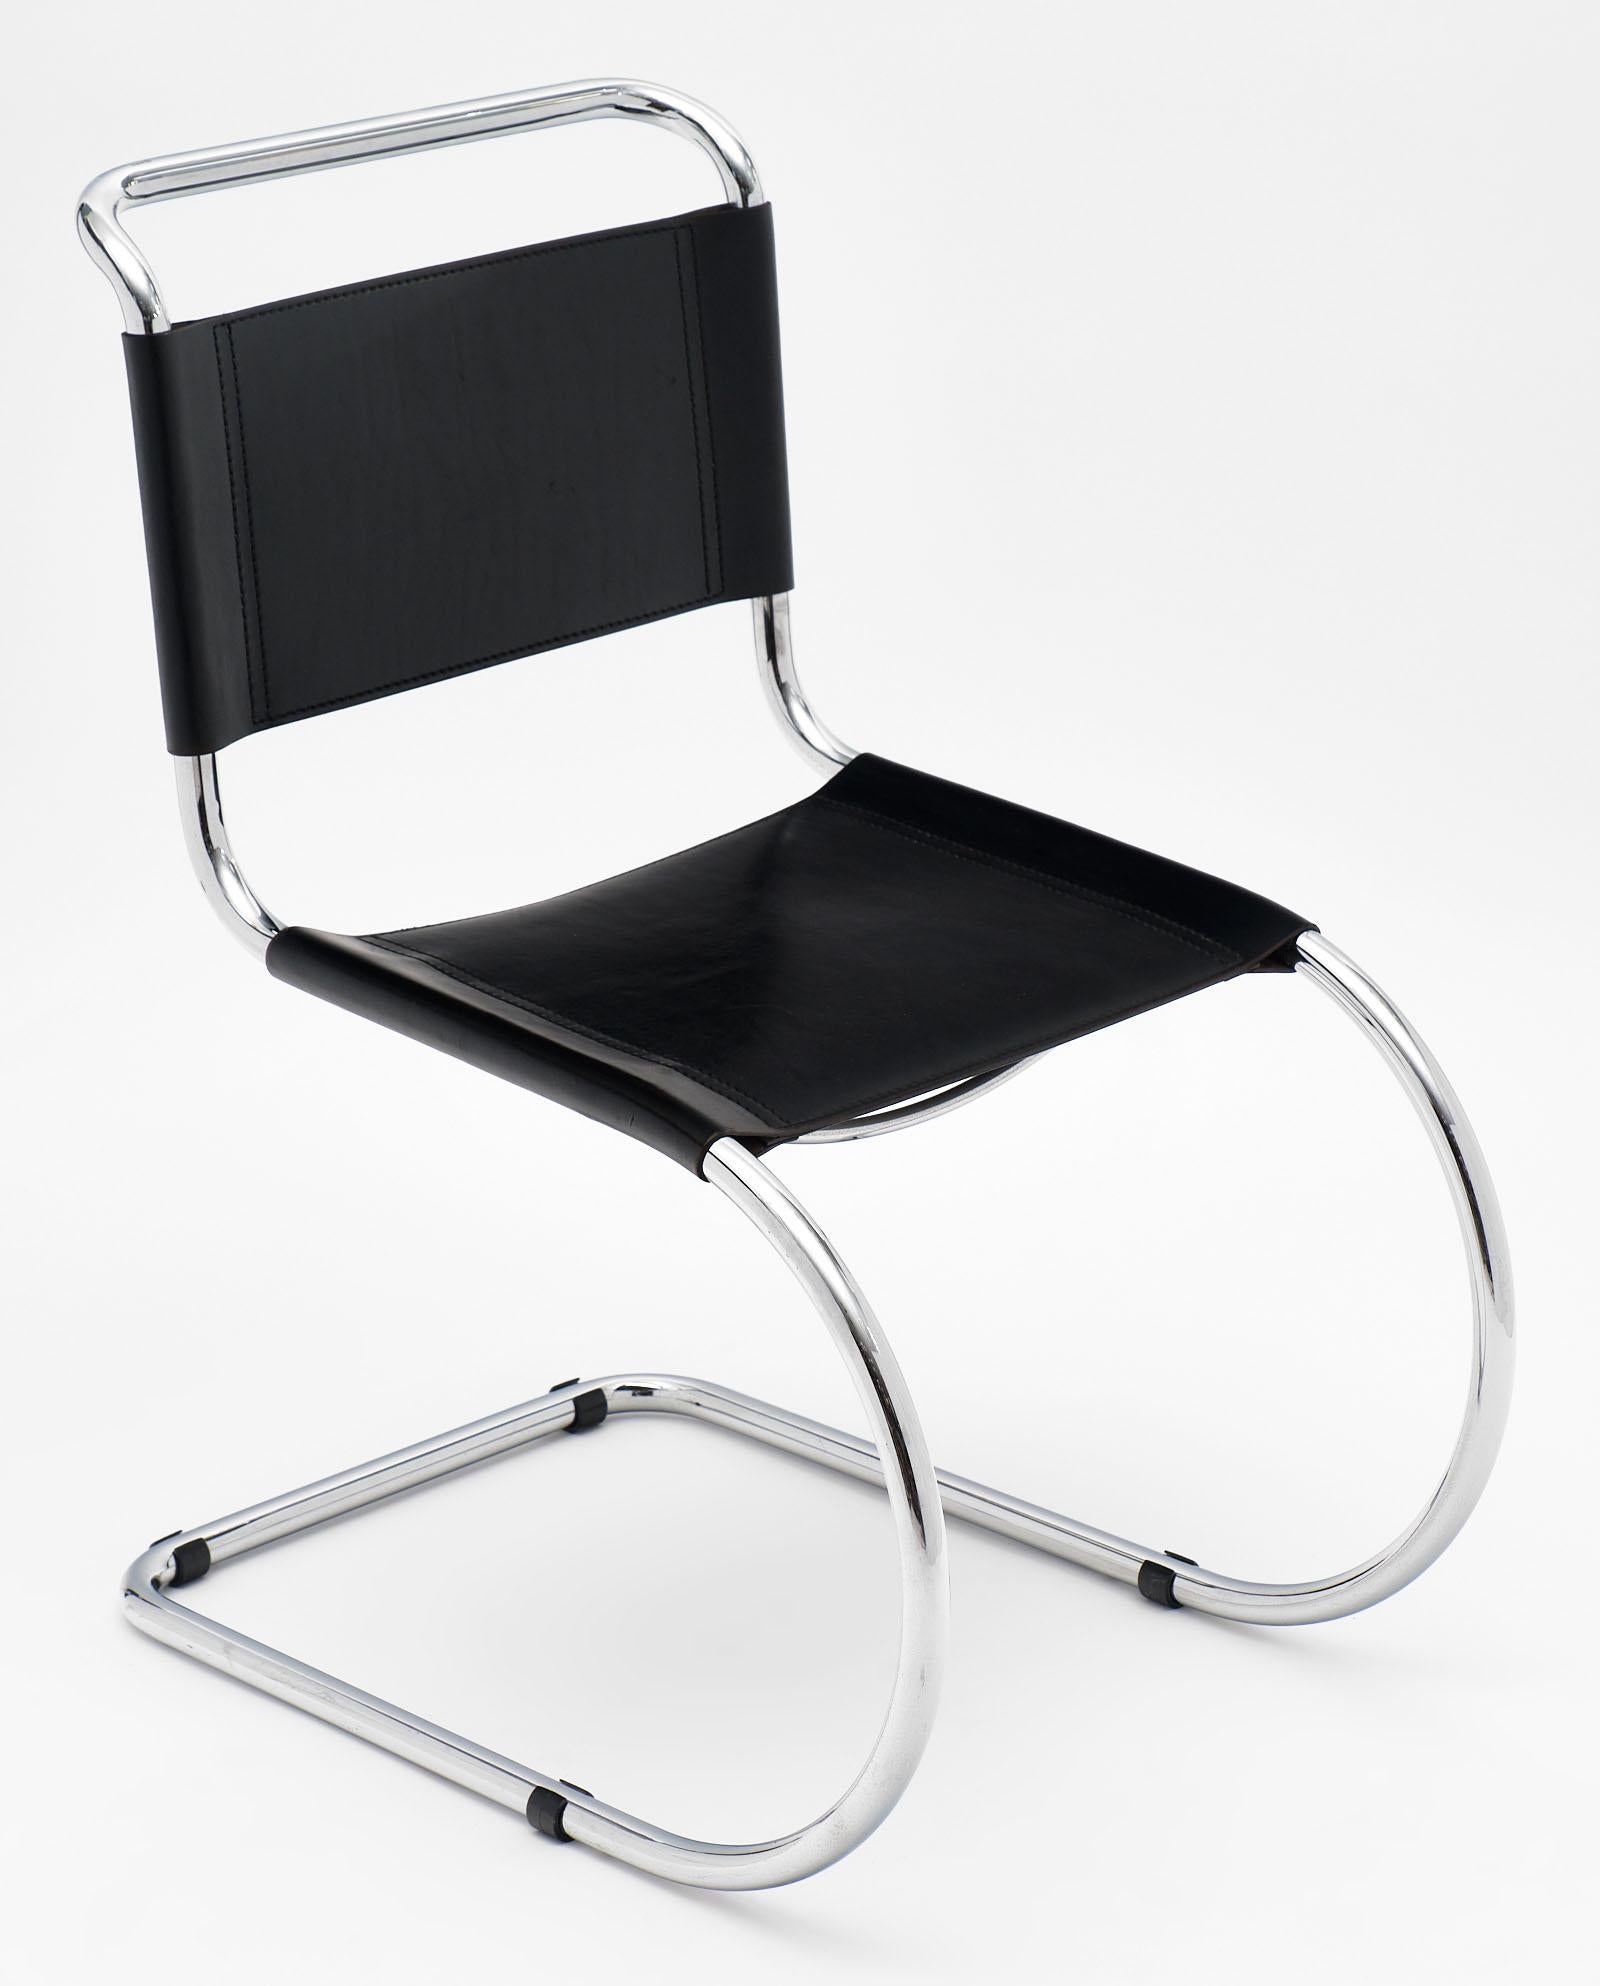 A pair of vintage Mies van der Rohe cantilever chairs with chromed metal structures and black leather seats. We love the spirit of Bauhaus in this design. The leather is nice and thick with a beautiful patina. Iconic lines!